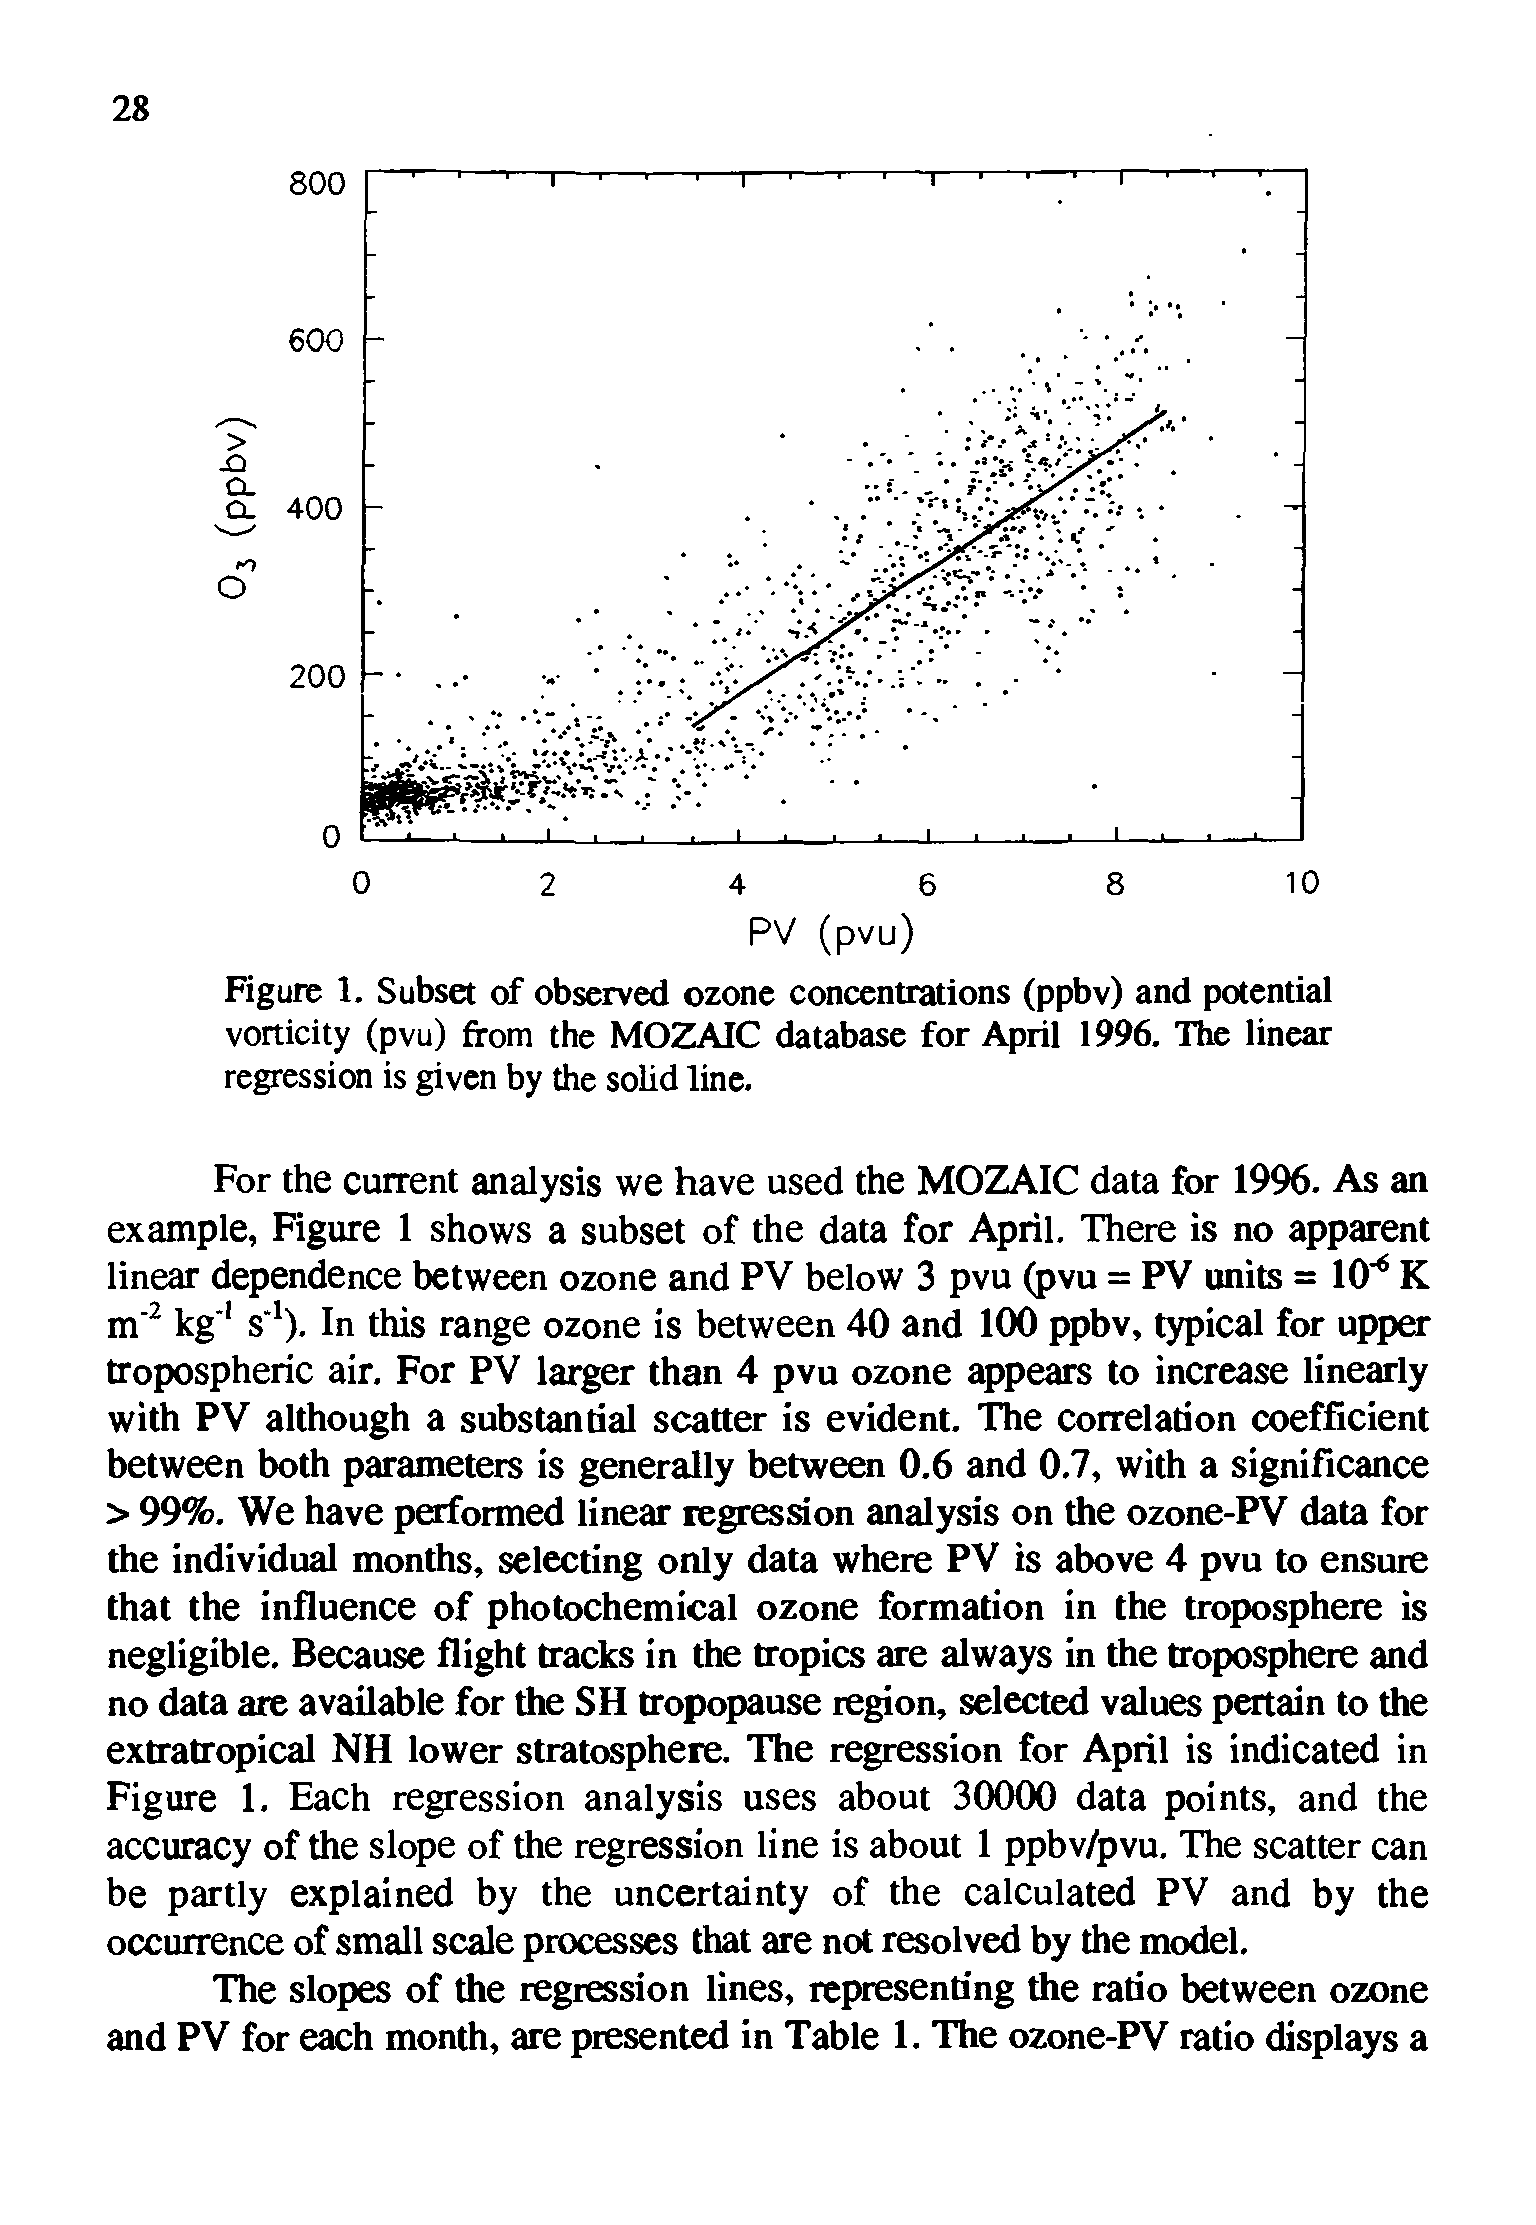 Figure 1. Subset of observed ozone concentrations (ppbv) and potential vorticity (pvu) from the MOZAIC database for April 1996. The linear regression is given by the solid line.